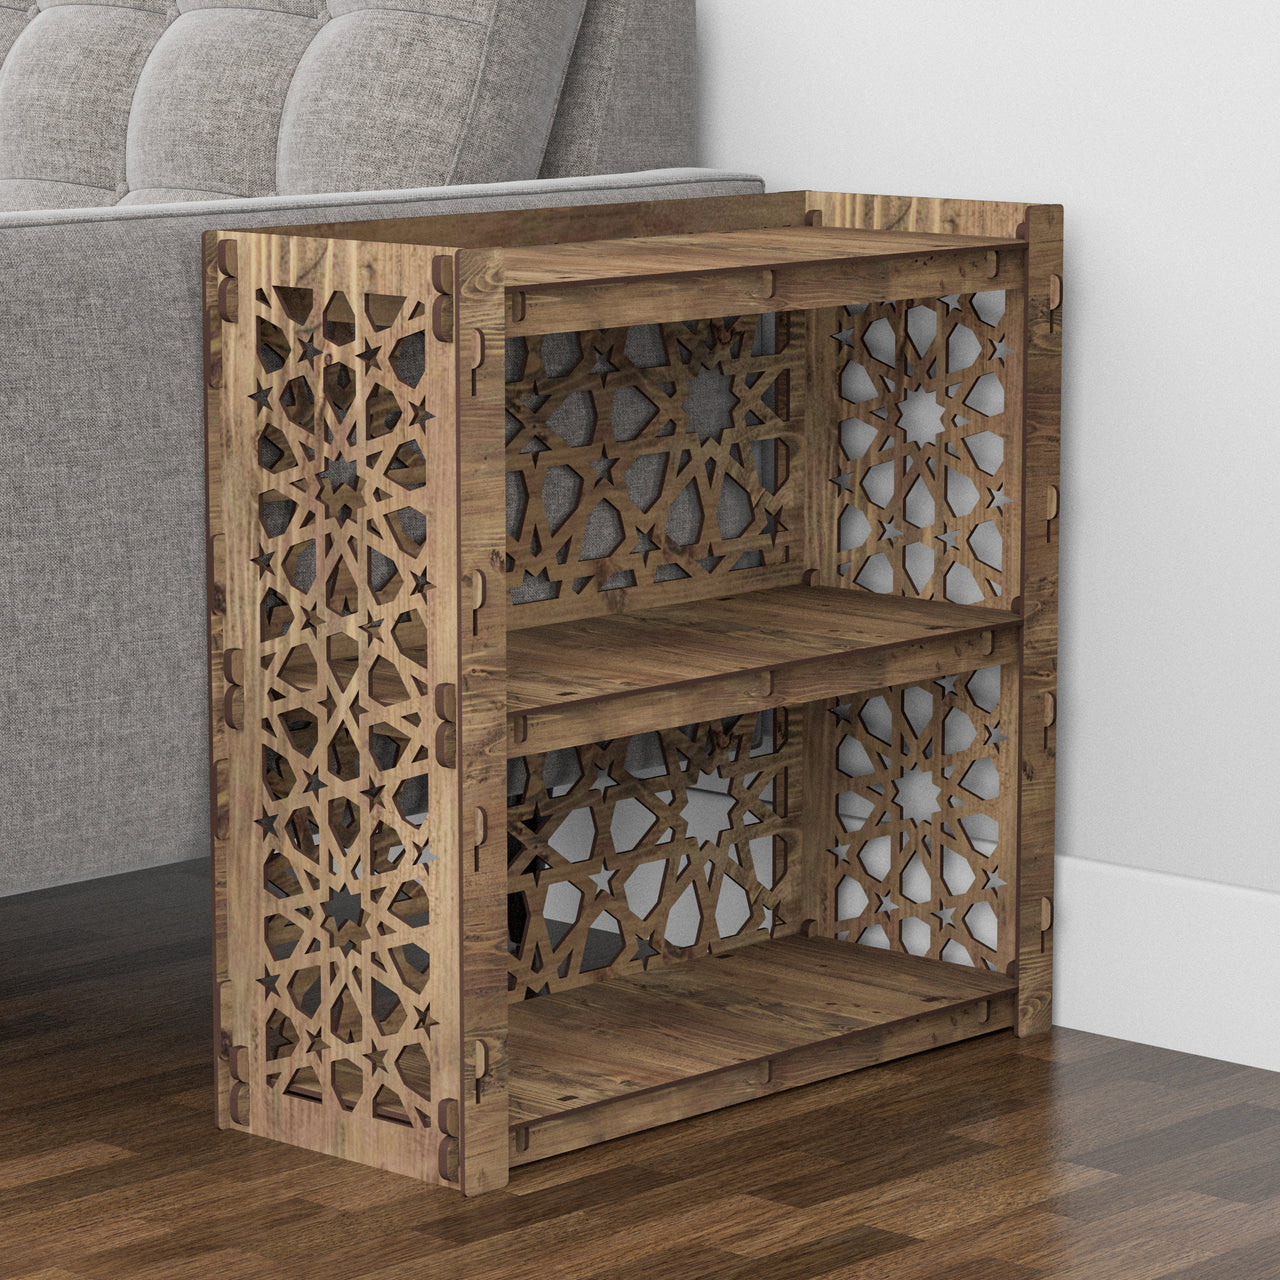 Arabic Side Table, End Table 1 Drawer [1 LARGE GRAY BIN]